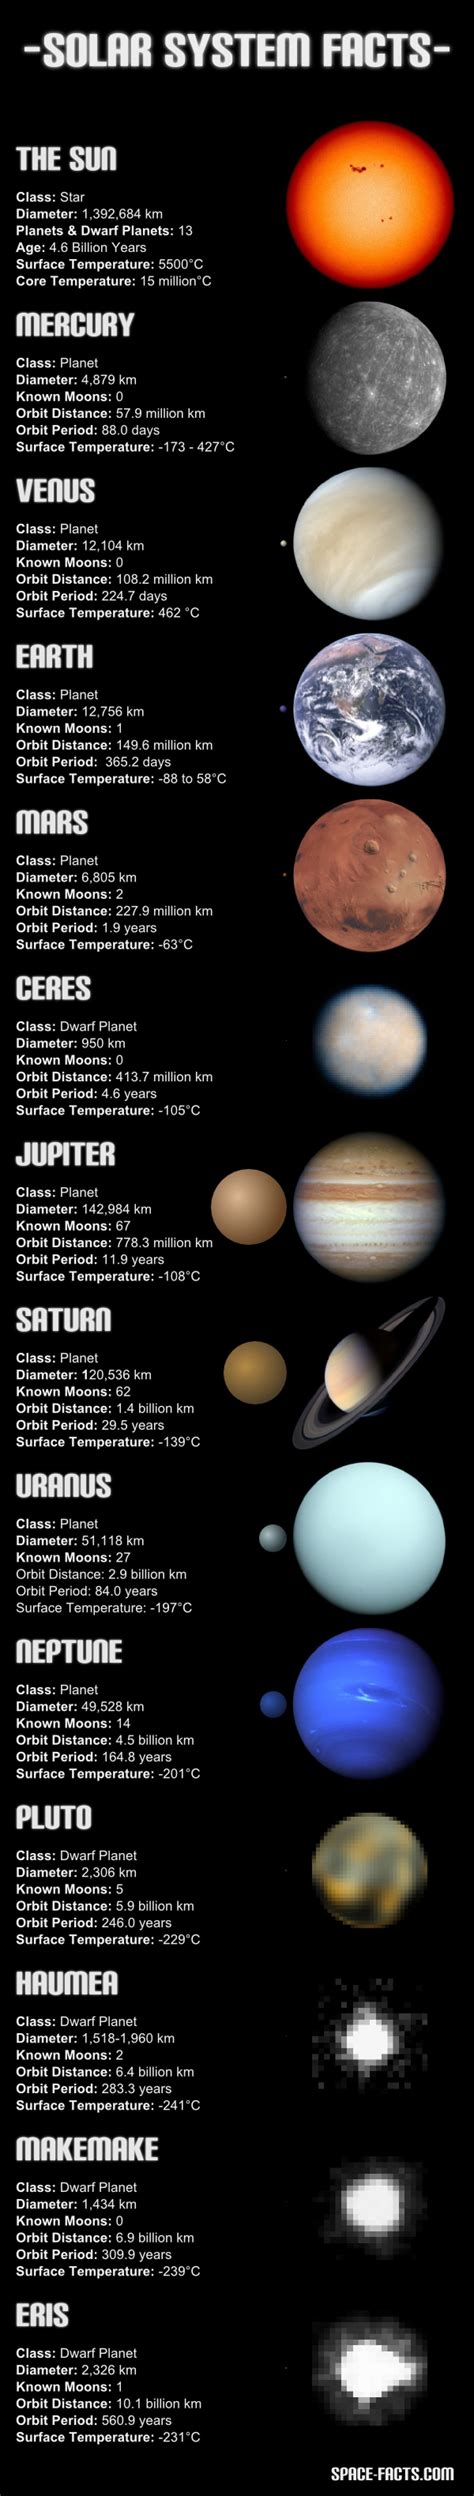 Astonishing Space And The Solar System Solar System Facts Solar